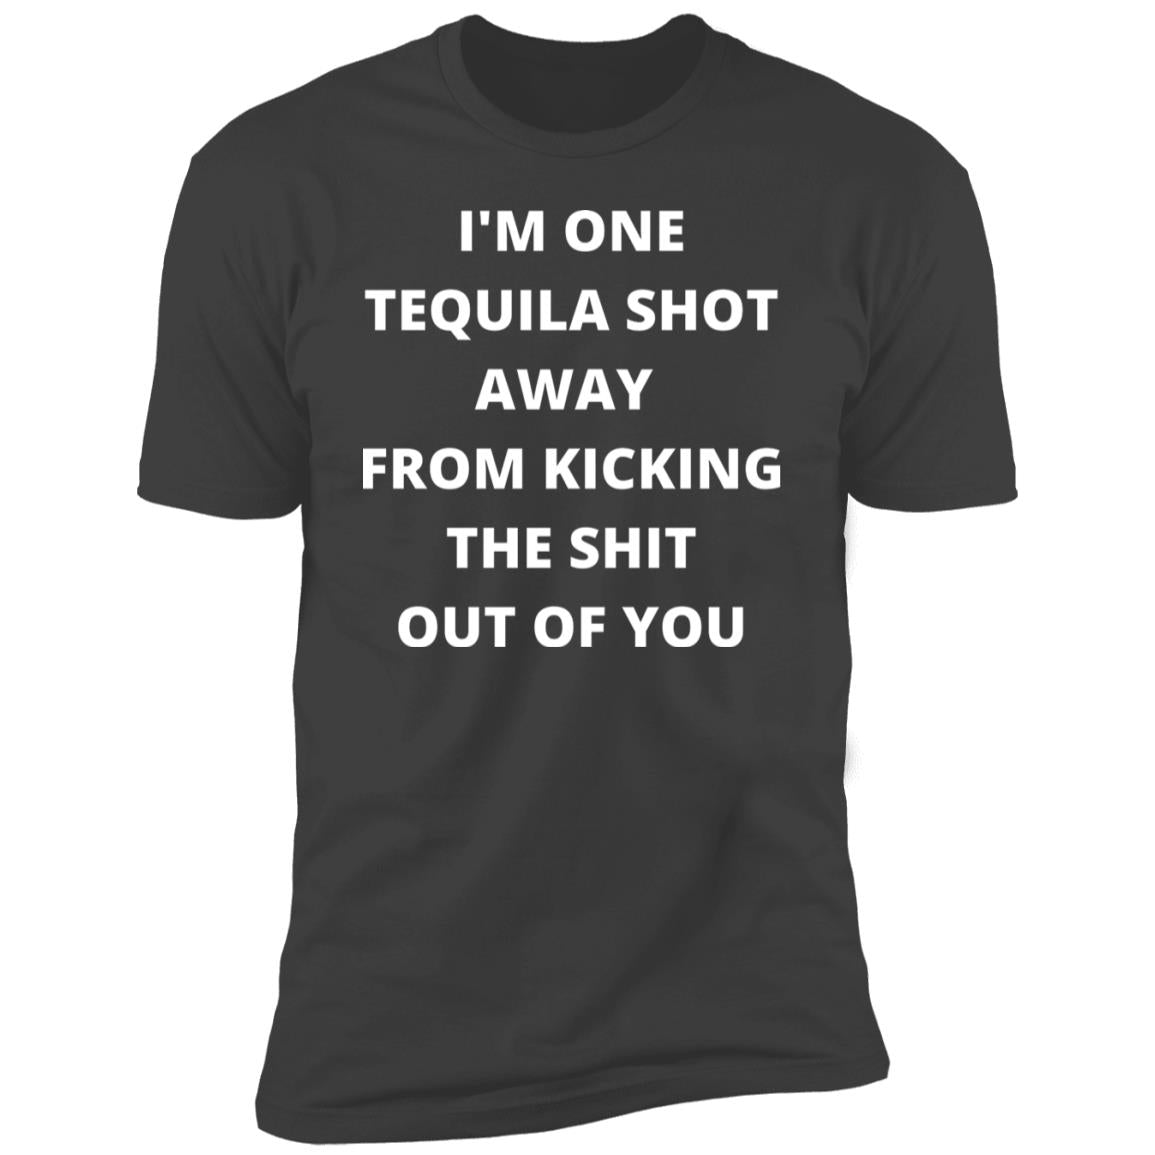 Funny Tequila Drinking Party Shirt I'm One Shot Away Premium Short Sleeve Tee